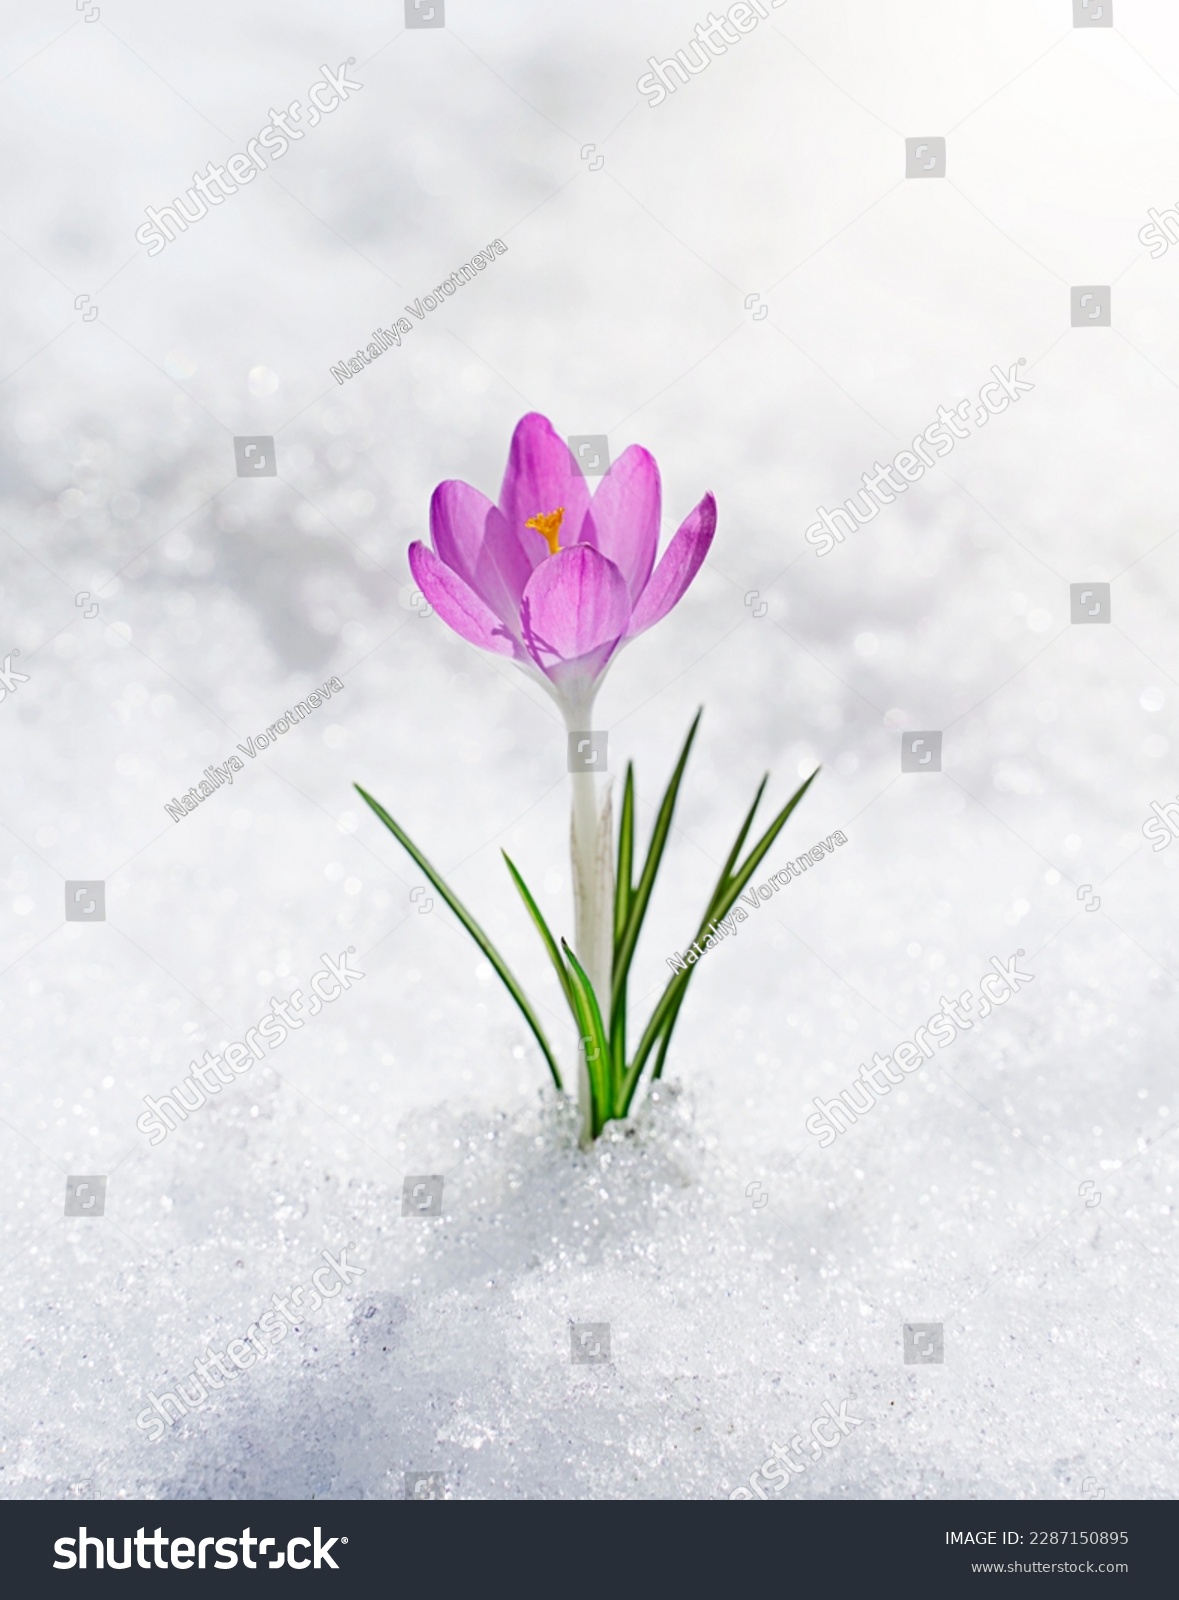 A lonely crocus flower growing from under the snow. Spring awakening. #2287150895